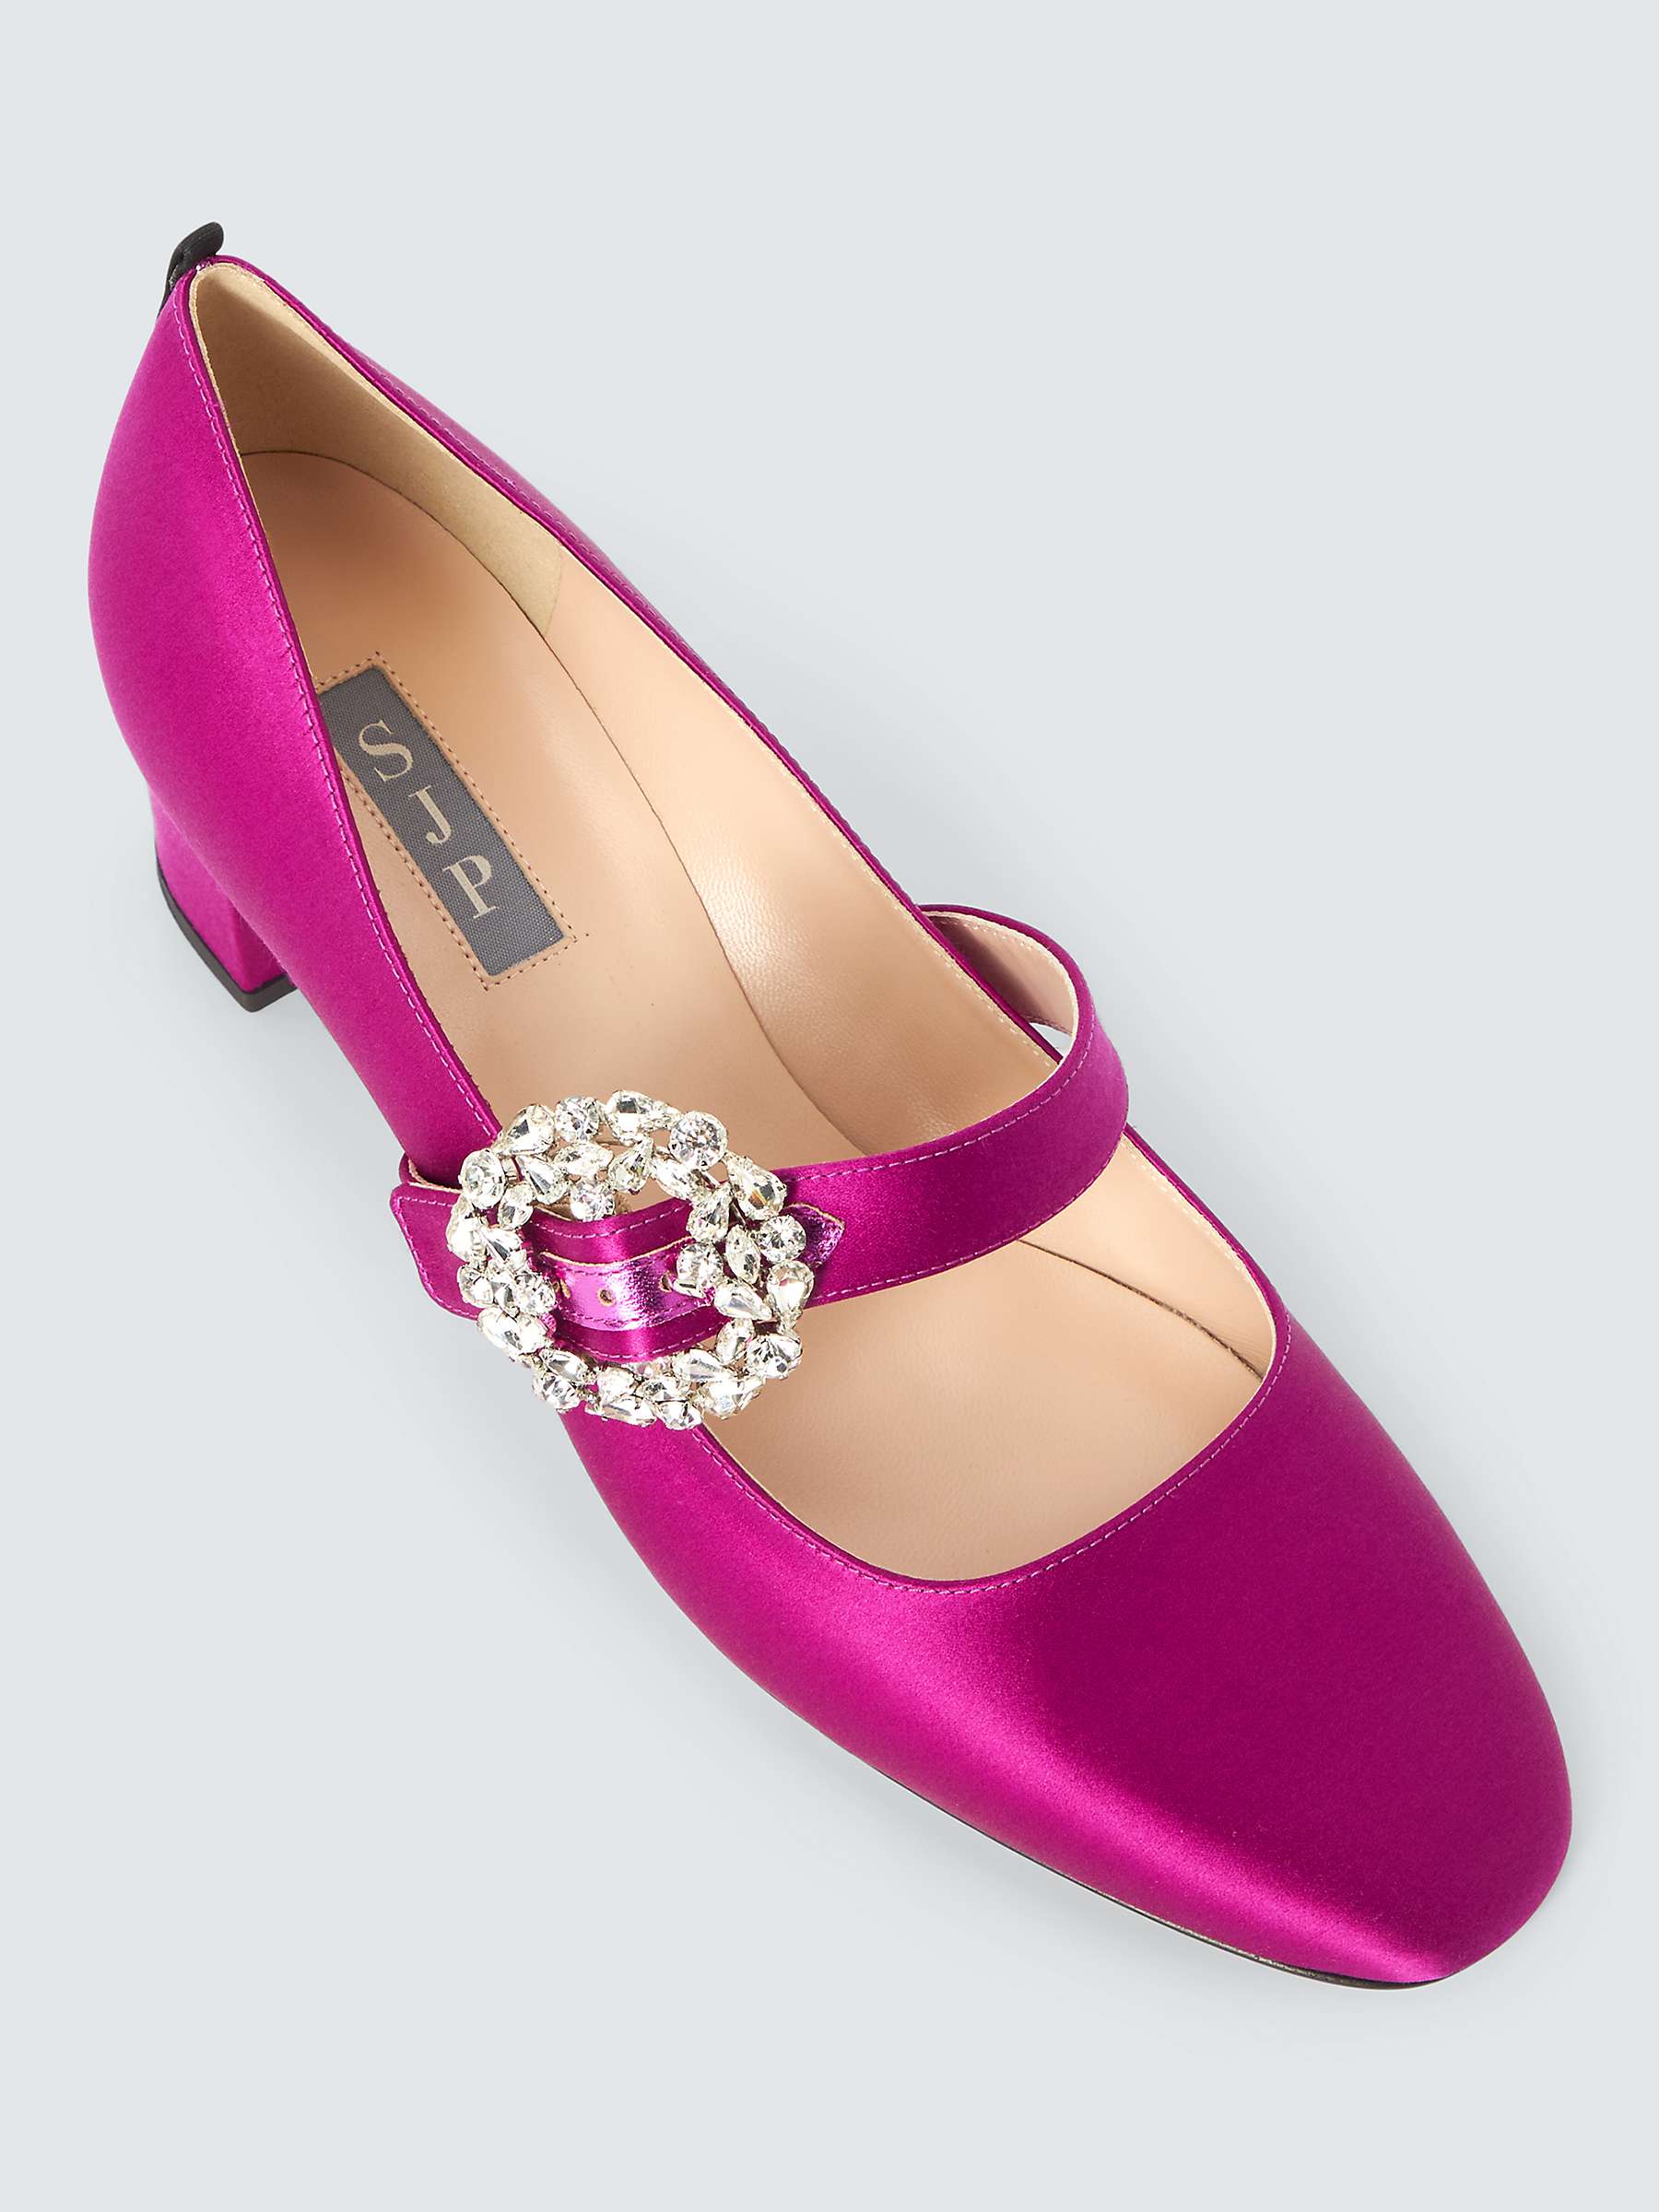 Buy SJP by Sarah Jessica Parker Cosette Mary Jane Satin Court Shoes Online at johnlewis.com